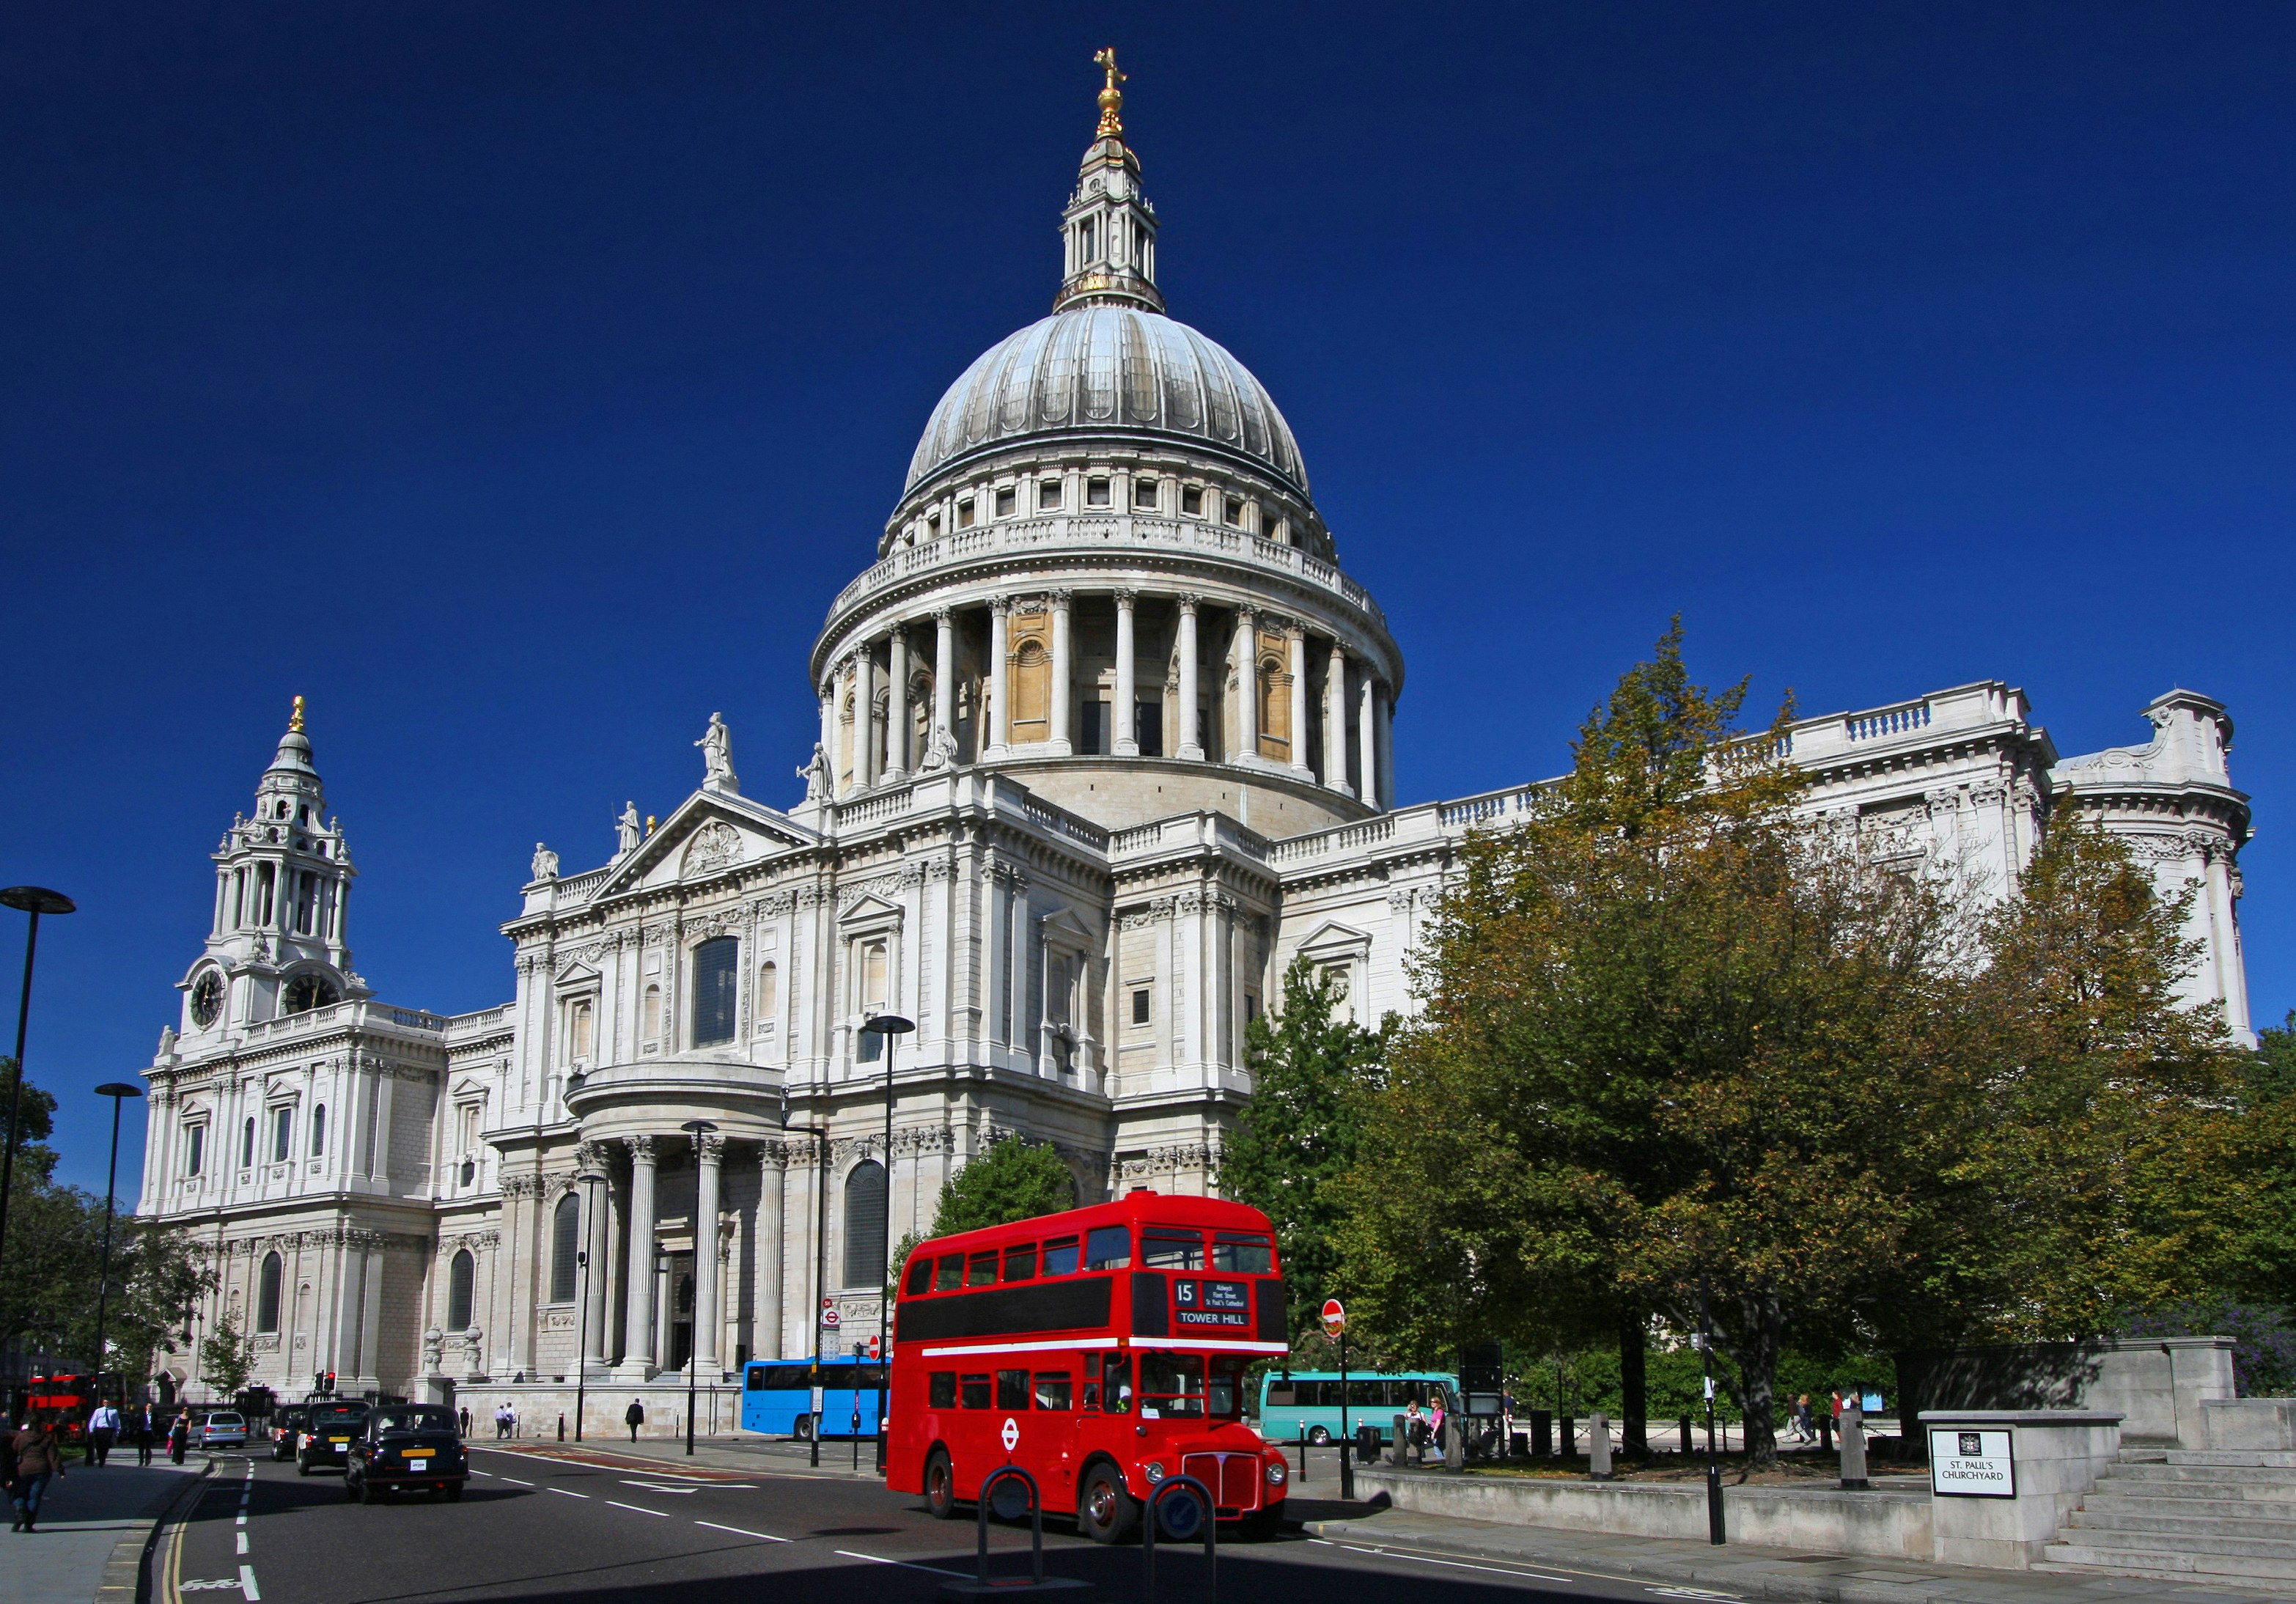 A red double-decker bus rolls past the white-washed, stone, domed St. Paul's Cathedral; Heathrow layover